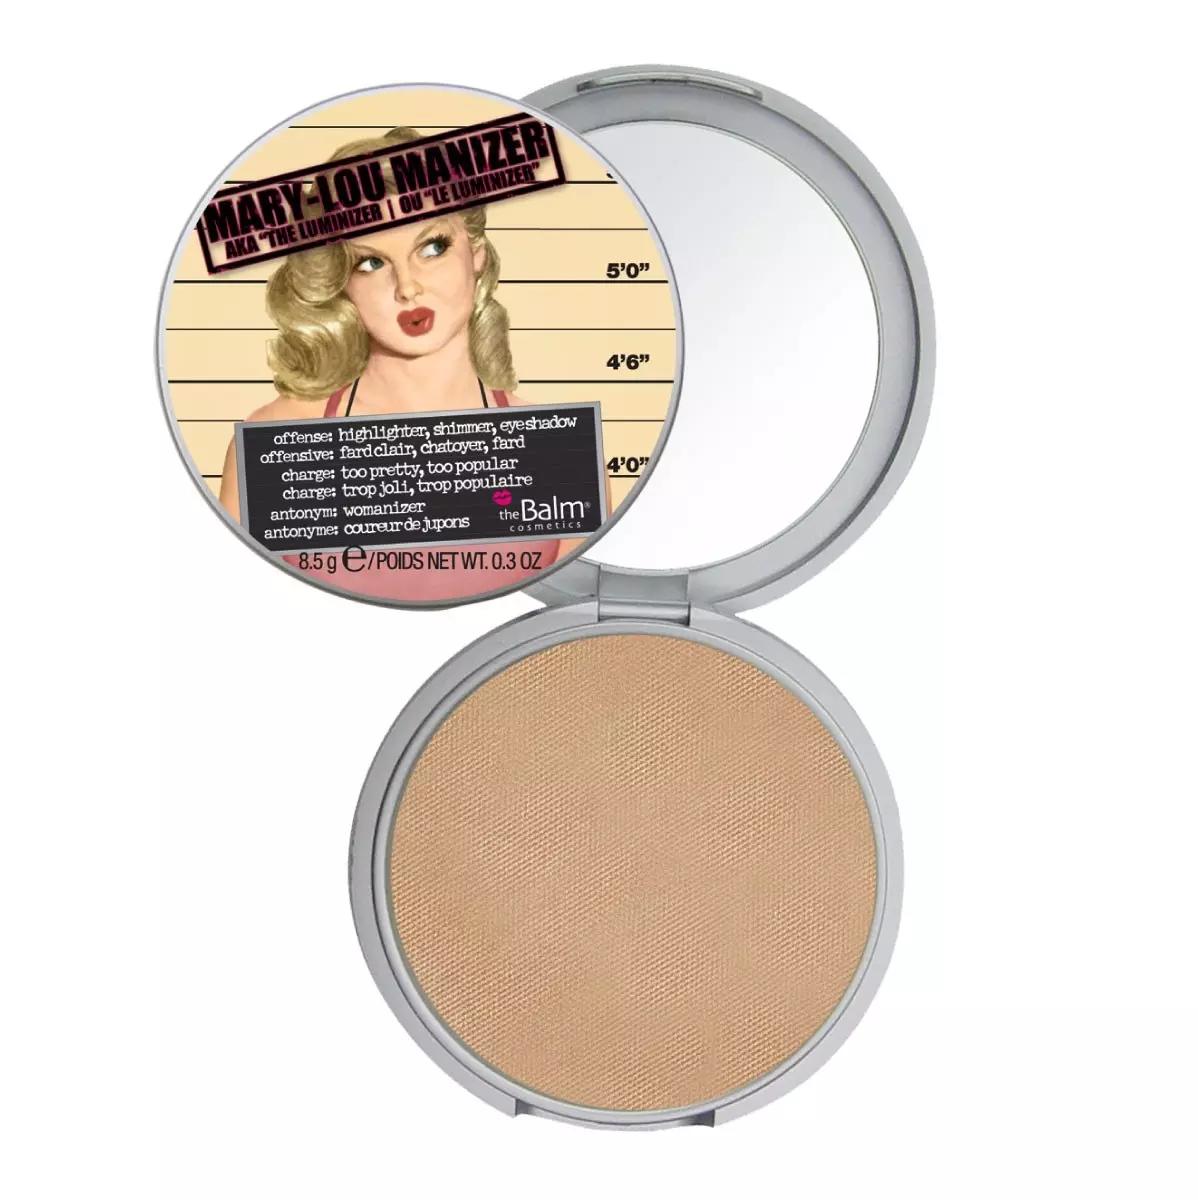 The Balm Highlighter Shimmer Pressed Powder Mary-Lou Manizer Mini